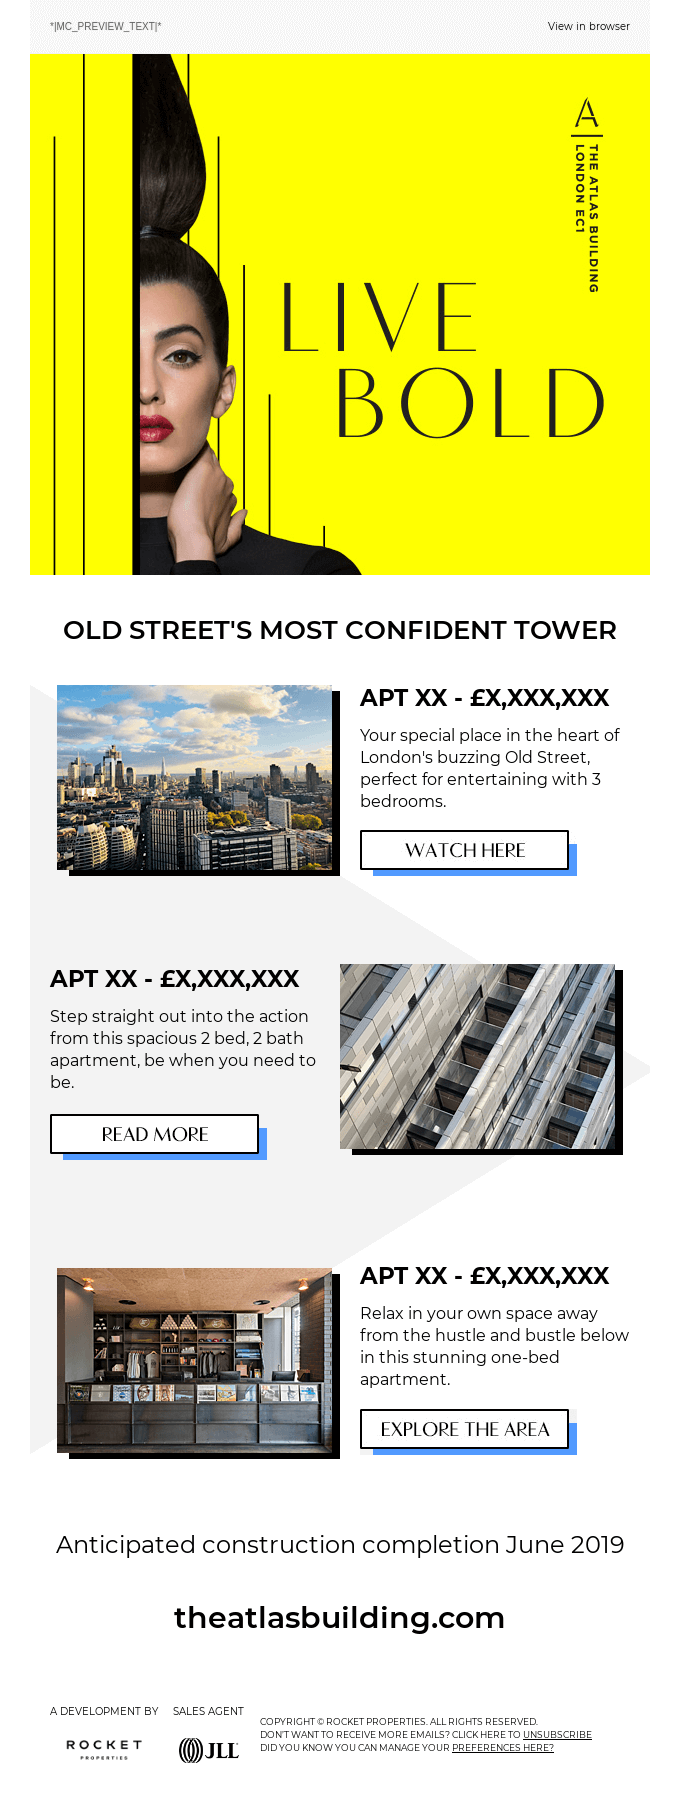 Old Street’s most confident tower